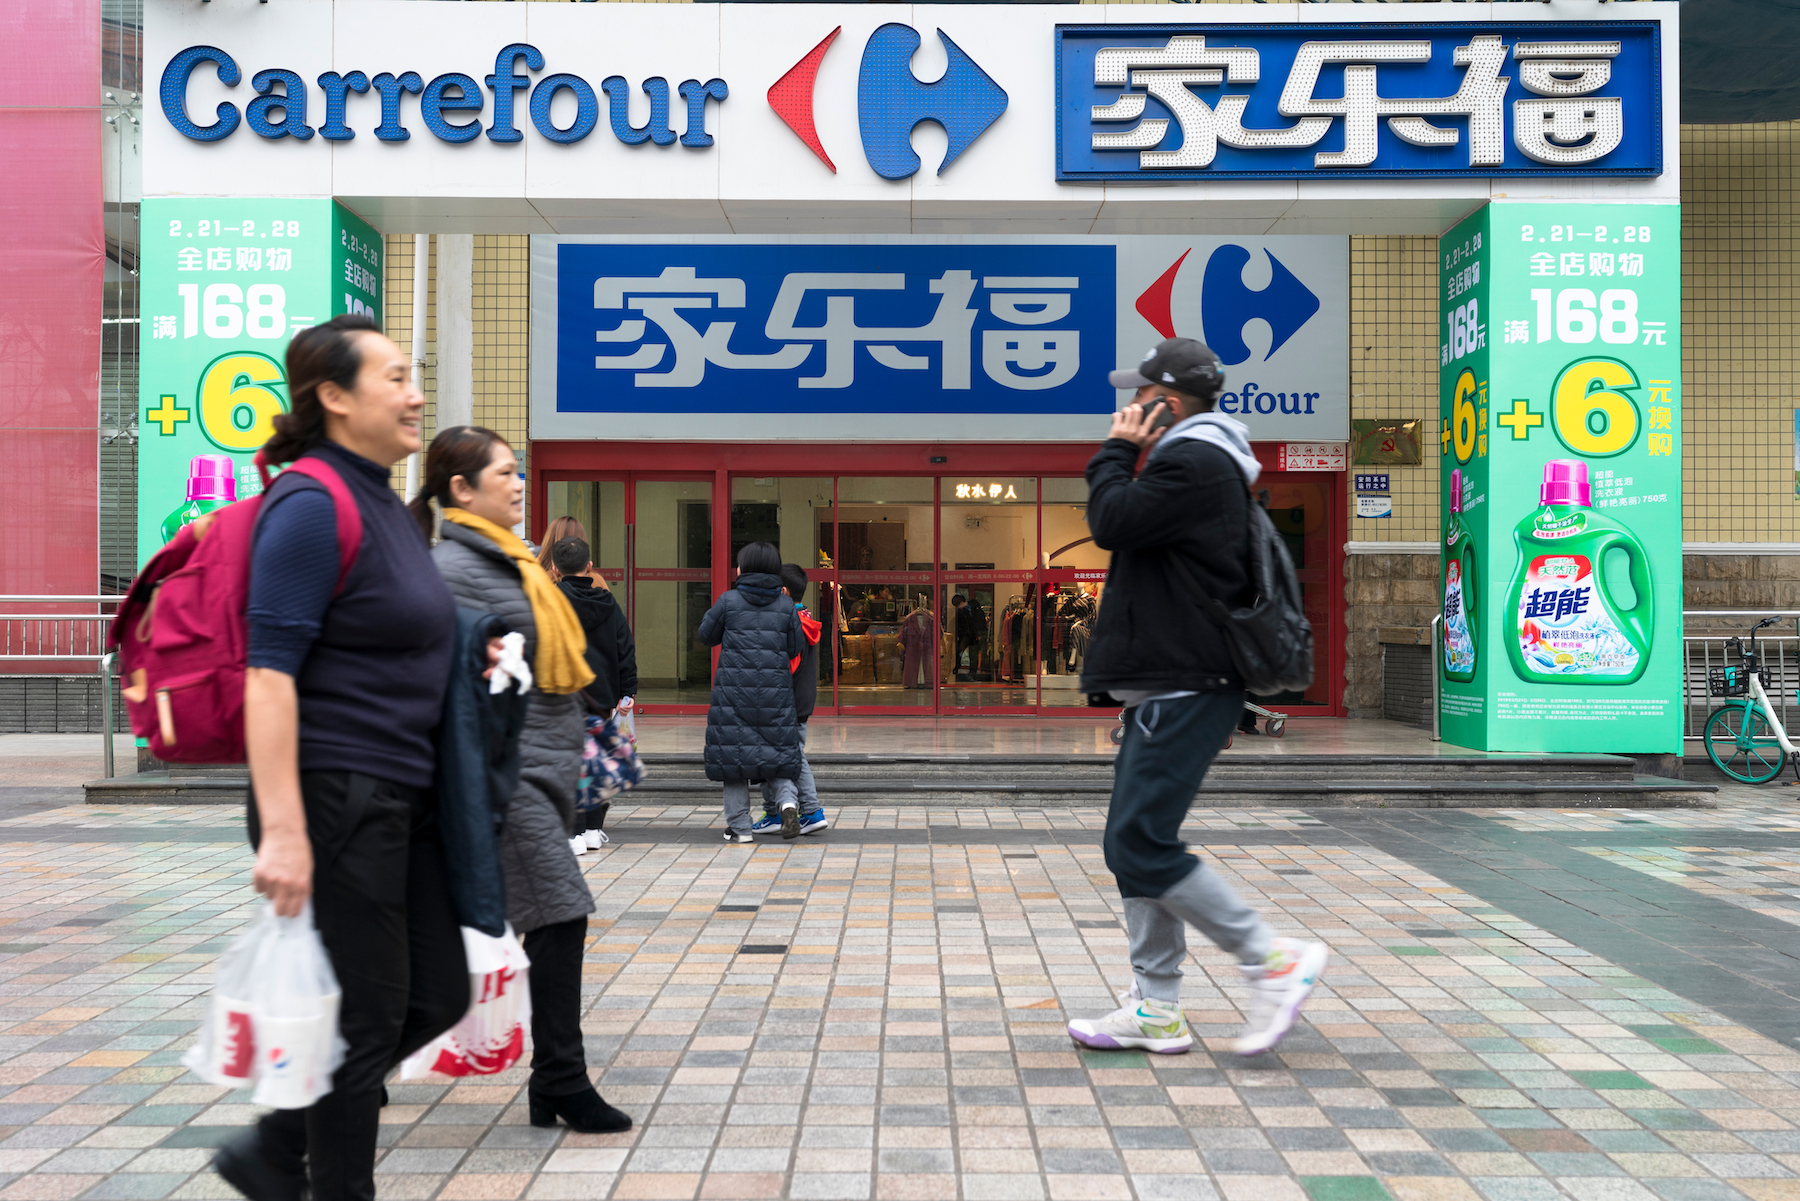 A Carrefour store in China